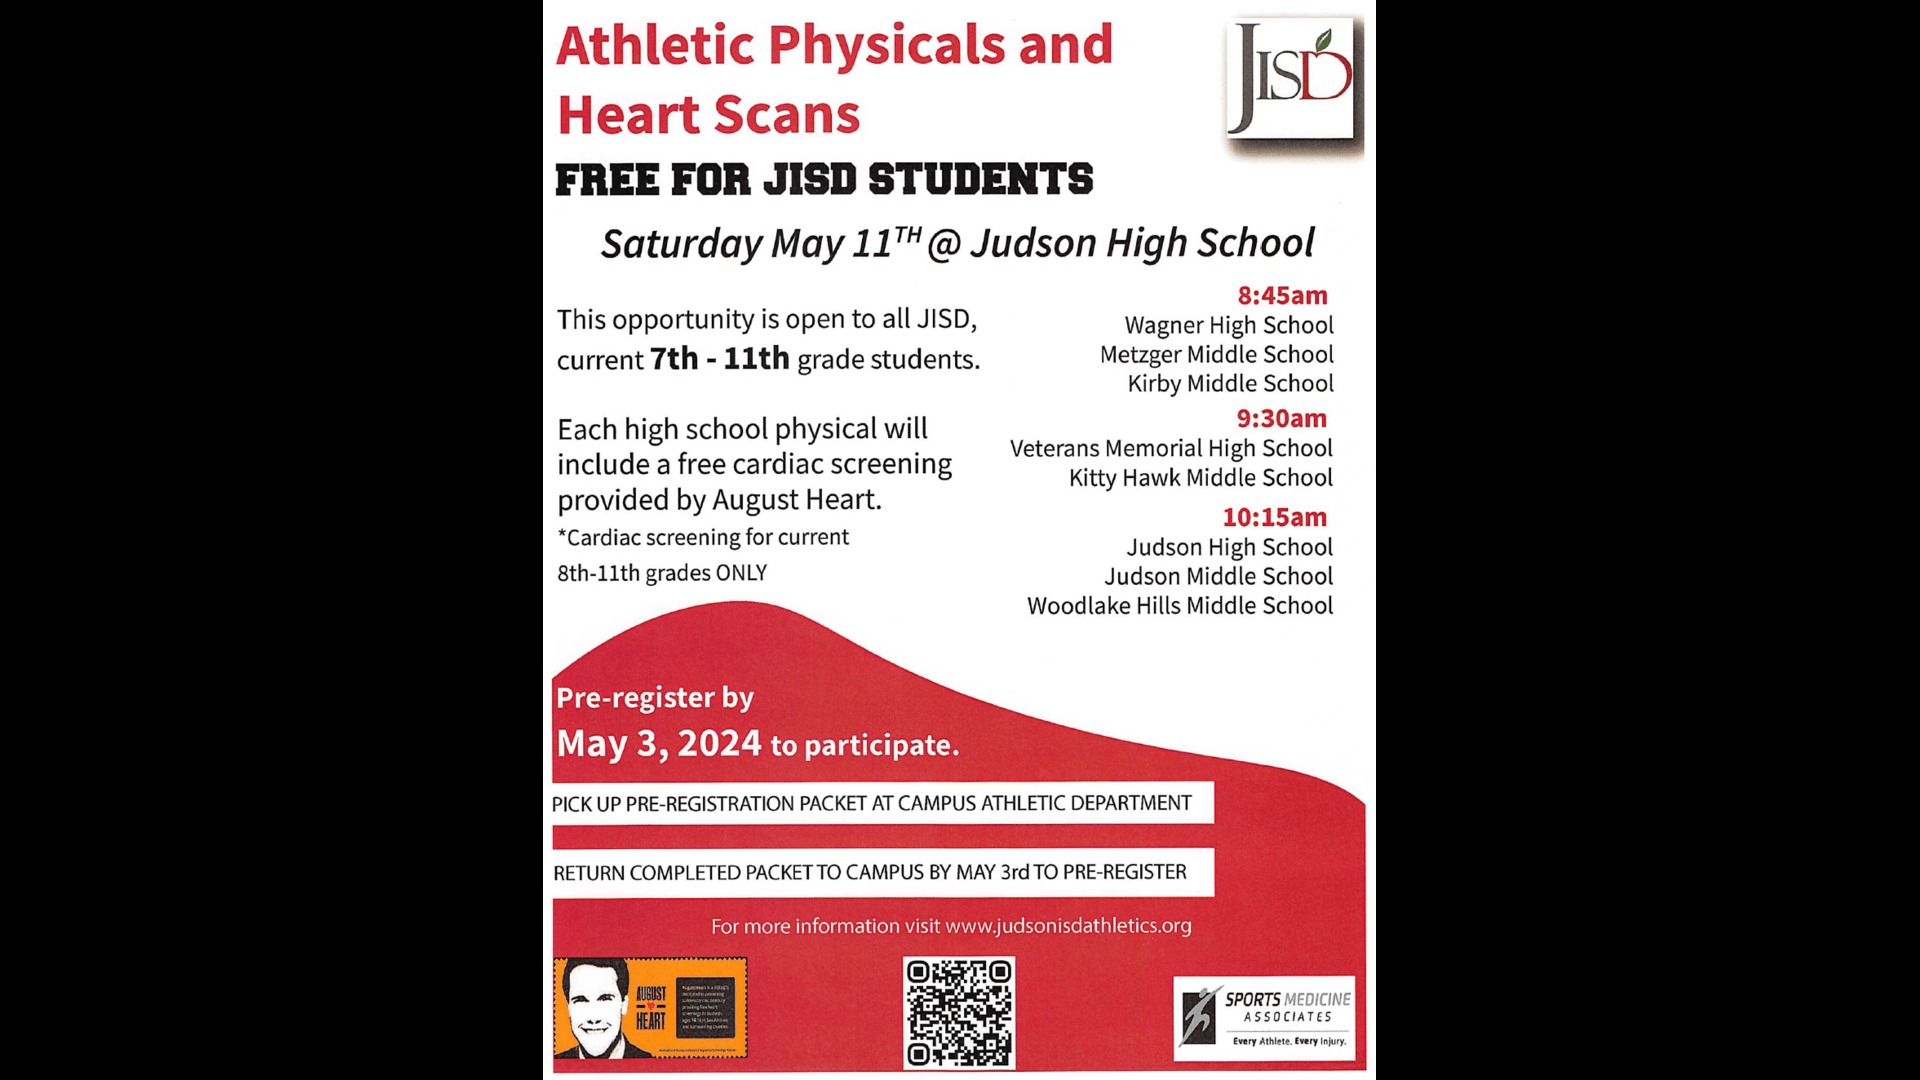 Judson ISDSlide 1 - Athletic Physicals - May 11th.